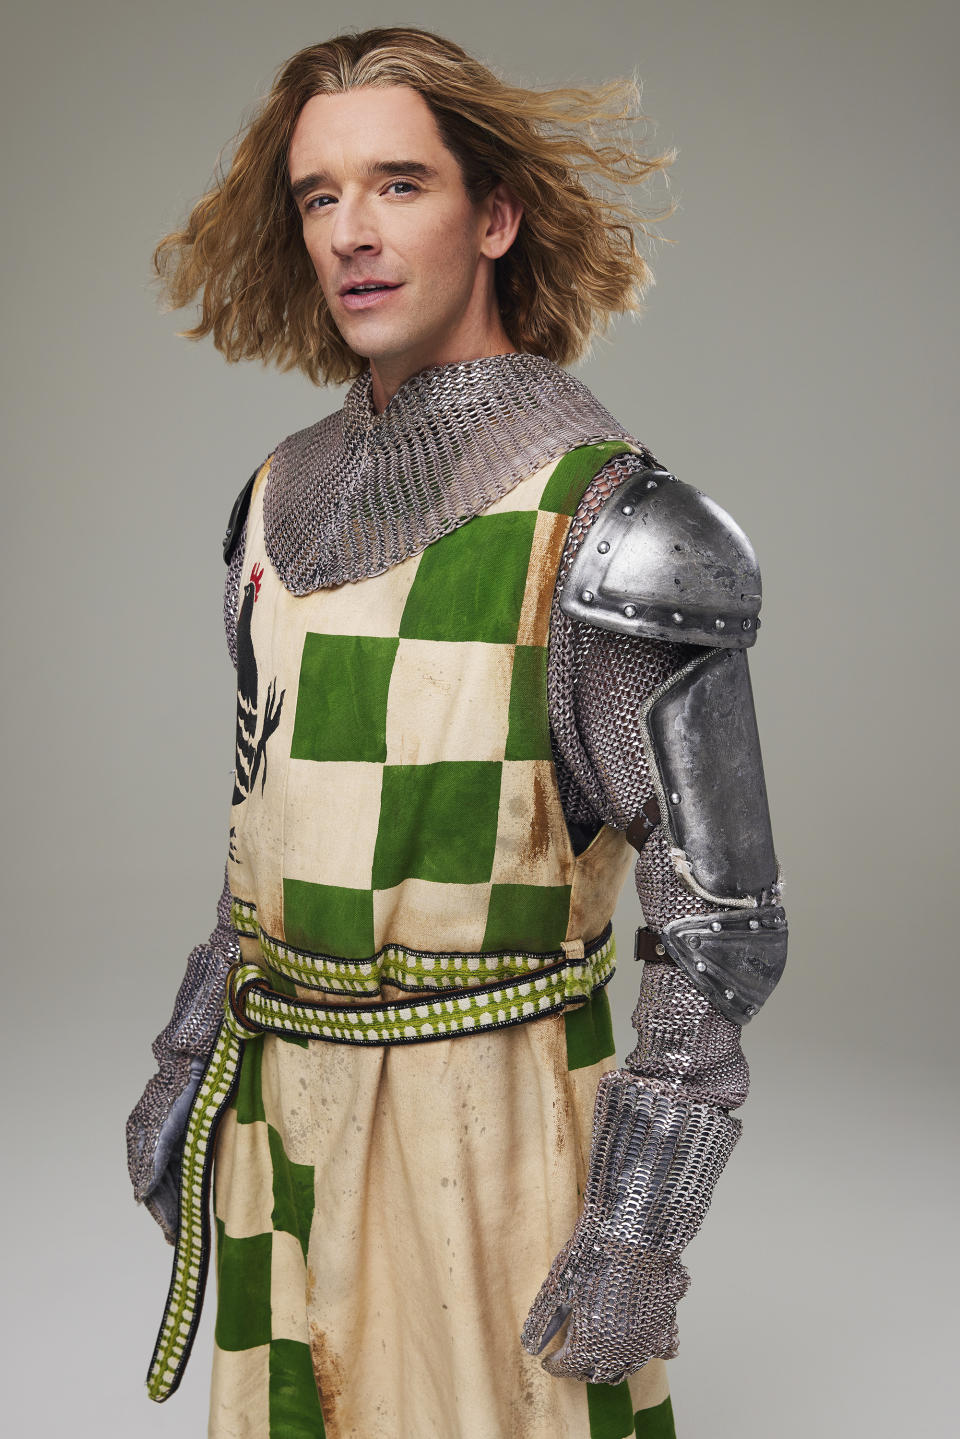 This image released by Polk & Co. shows actor Michael Urie in costume for his role in "Spamalot." (Matthew Murphy/Polk & Co. via AP)